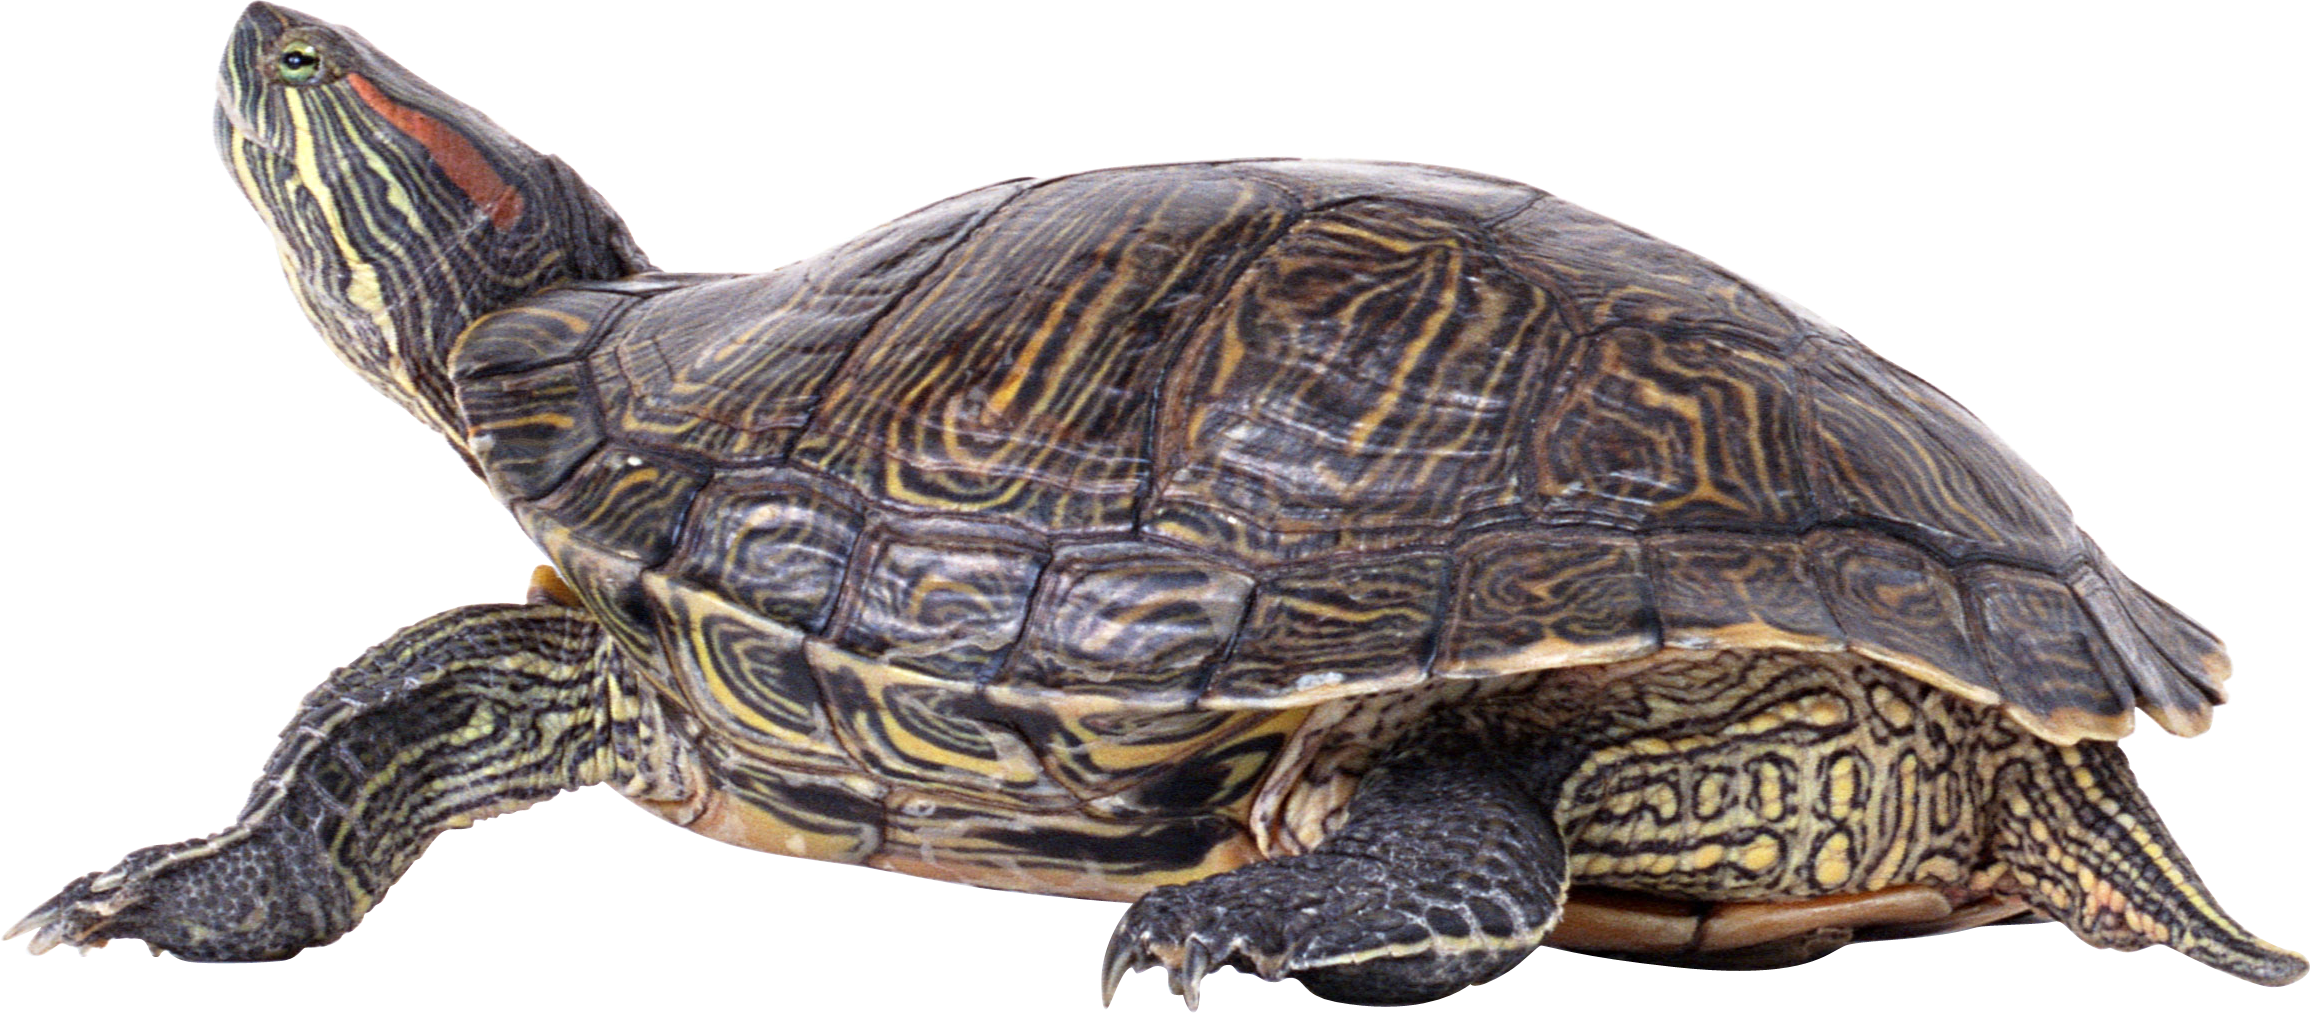 PNG Turtle Pictures Transparent Turtle Pictures.PNG Images. | PlusPNG